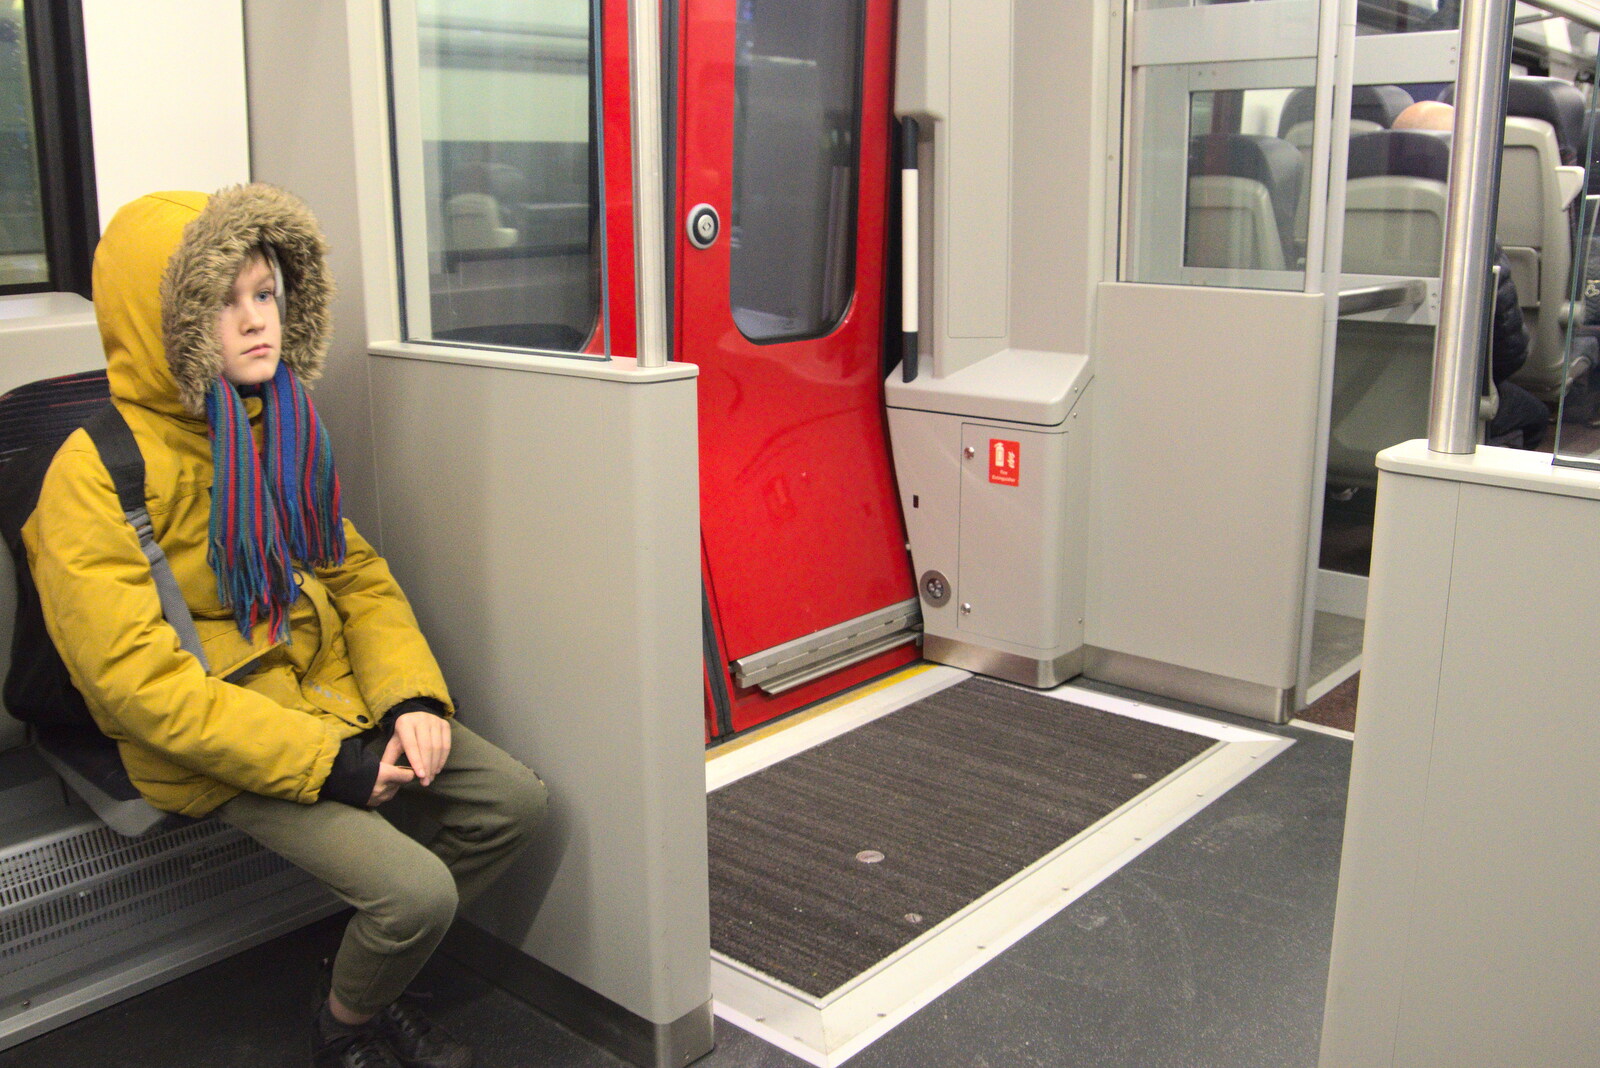 Harry sits by the train door from A Trip to the Natural History Museum, Kensington, London - 15th January 2022